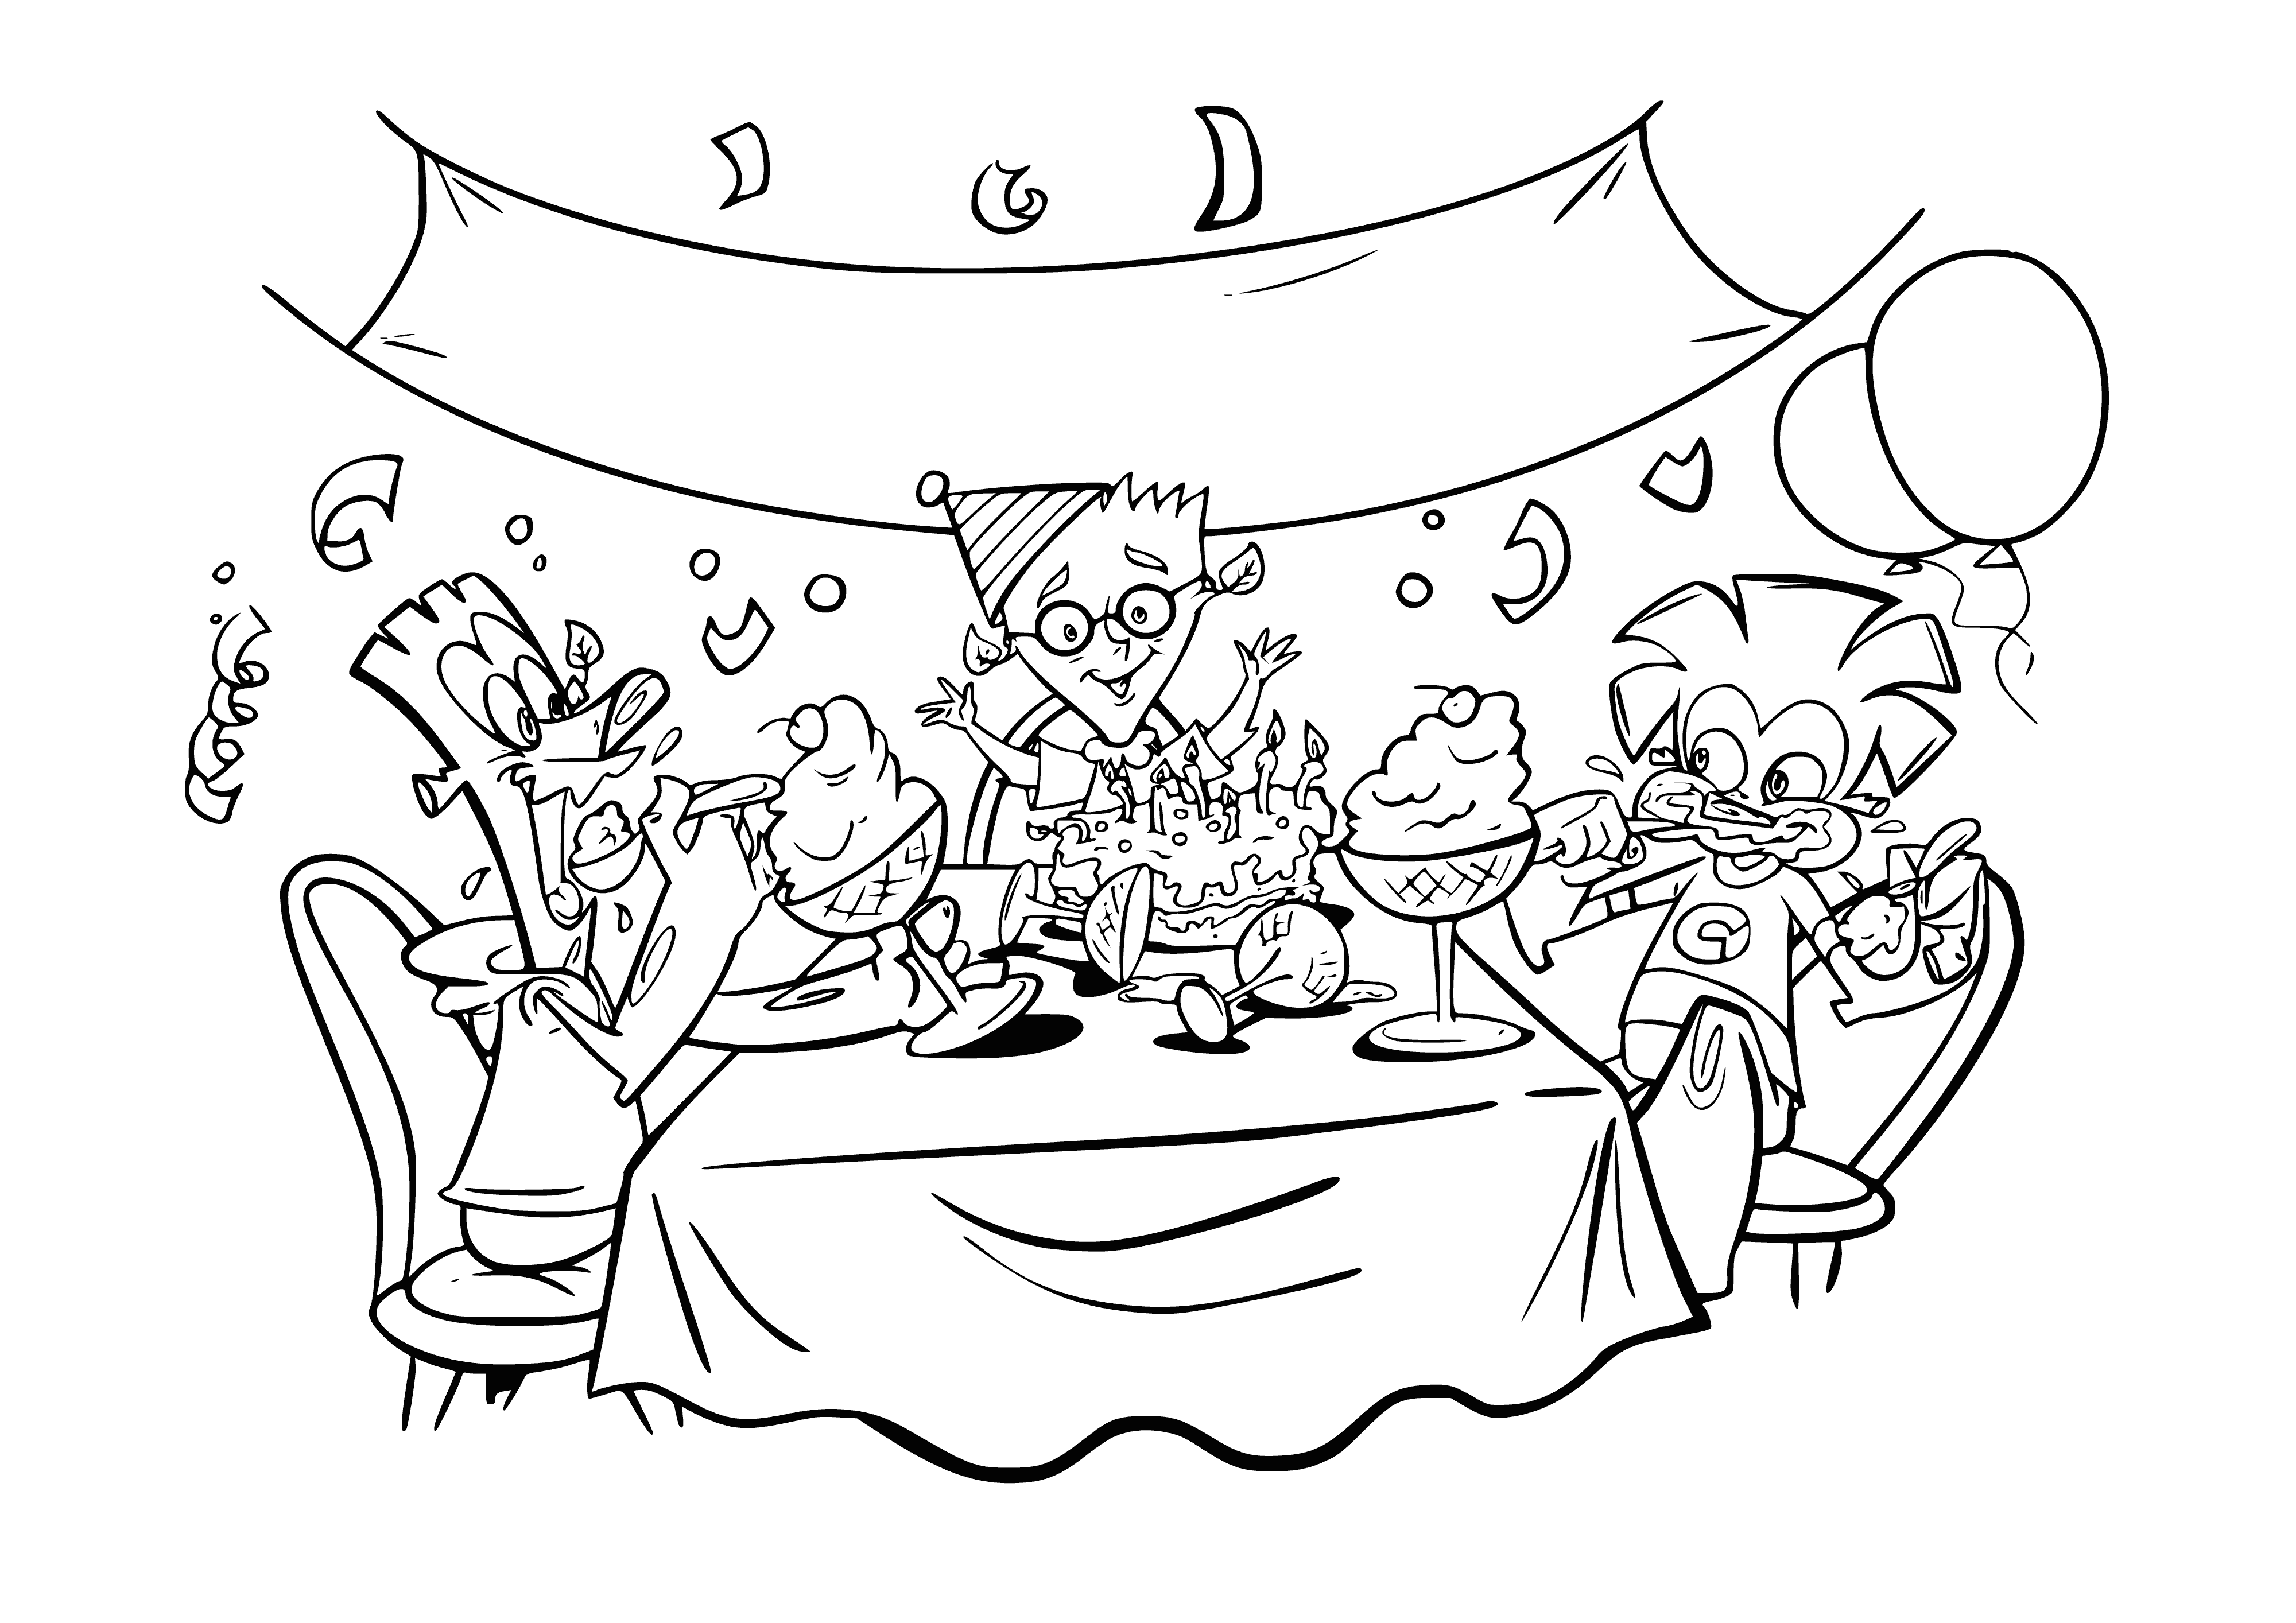 coloring page: Coloring page of "Leshiki" - Birthday cake with two children blowing out five candles. #animation #birthday #cakes